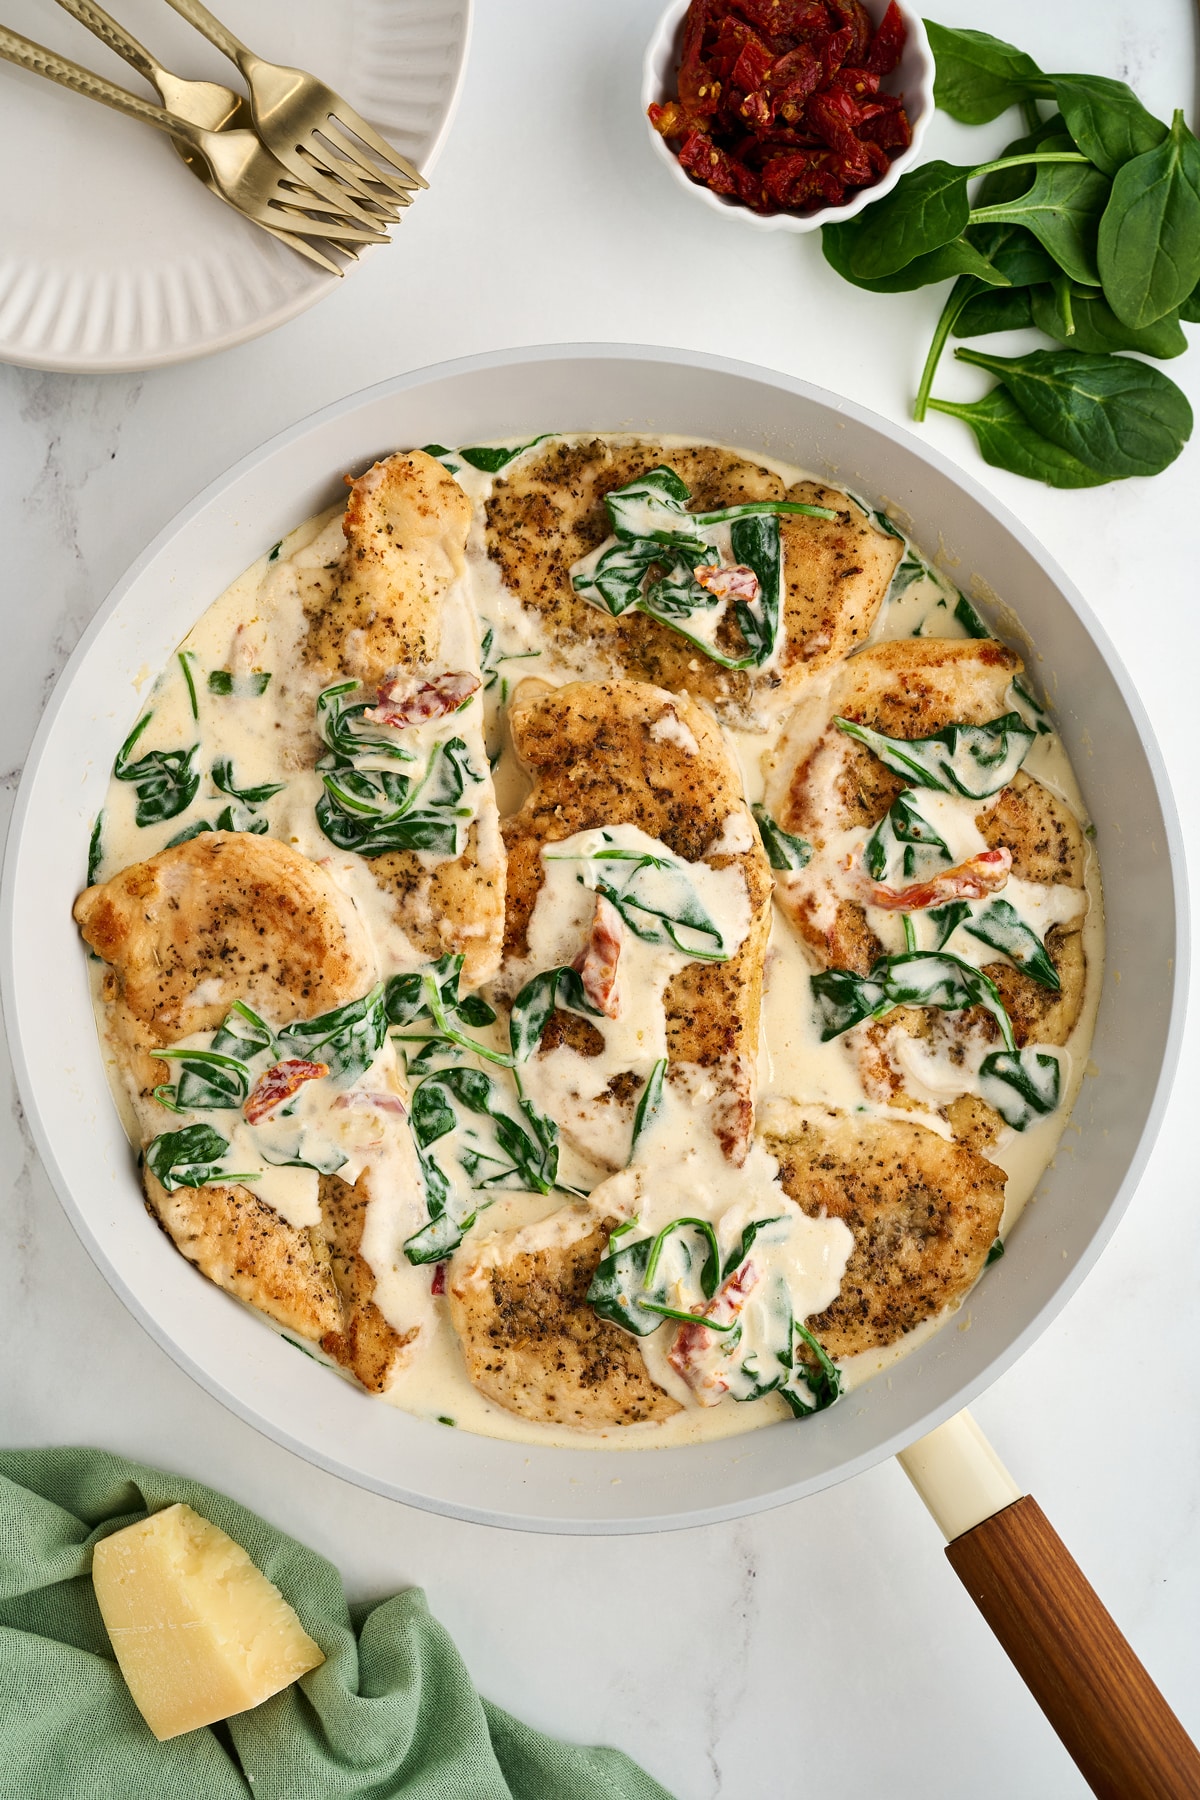 A pan of chicken florentine with cheese, spinach and other ingredients on the side.